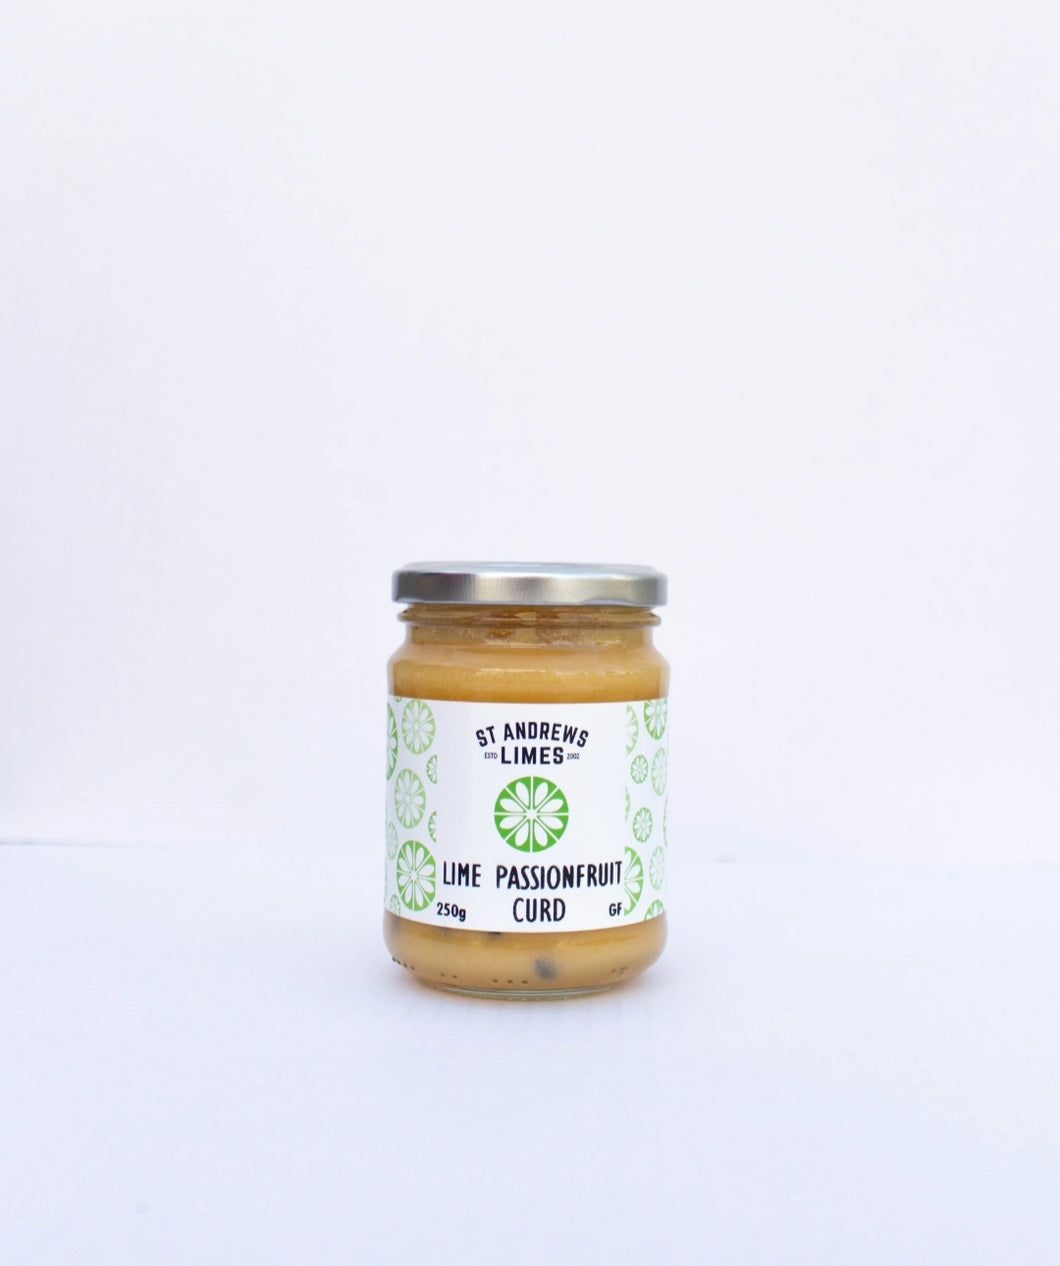 St Andrews Limes Lime Passionfruit Curd 250g